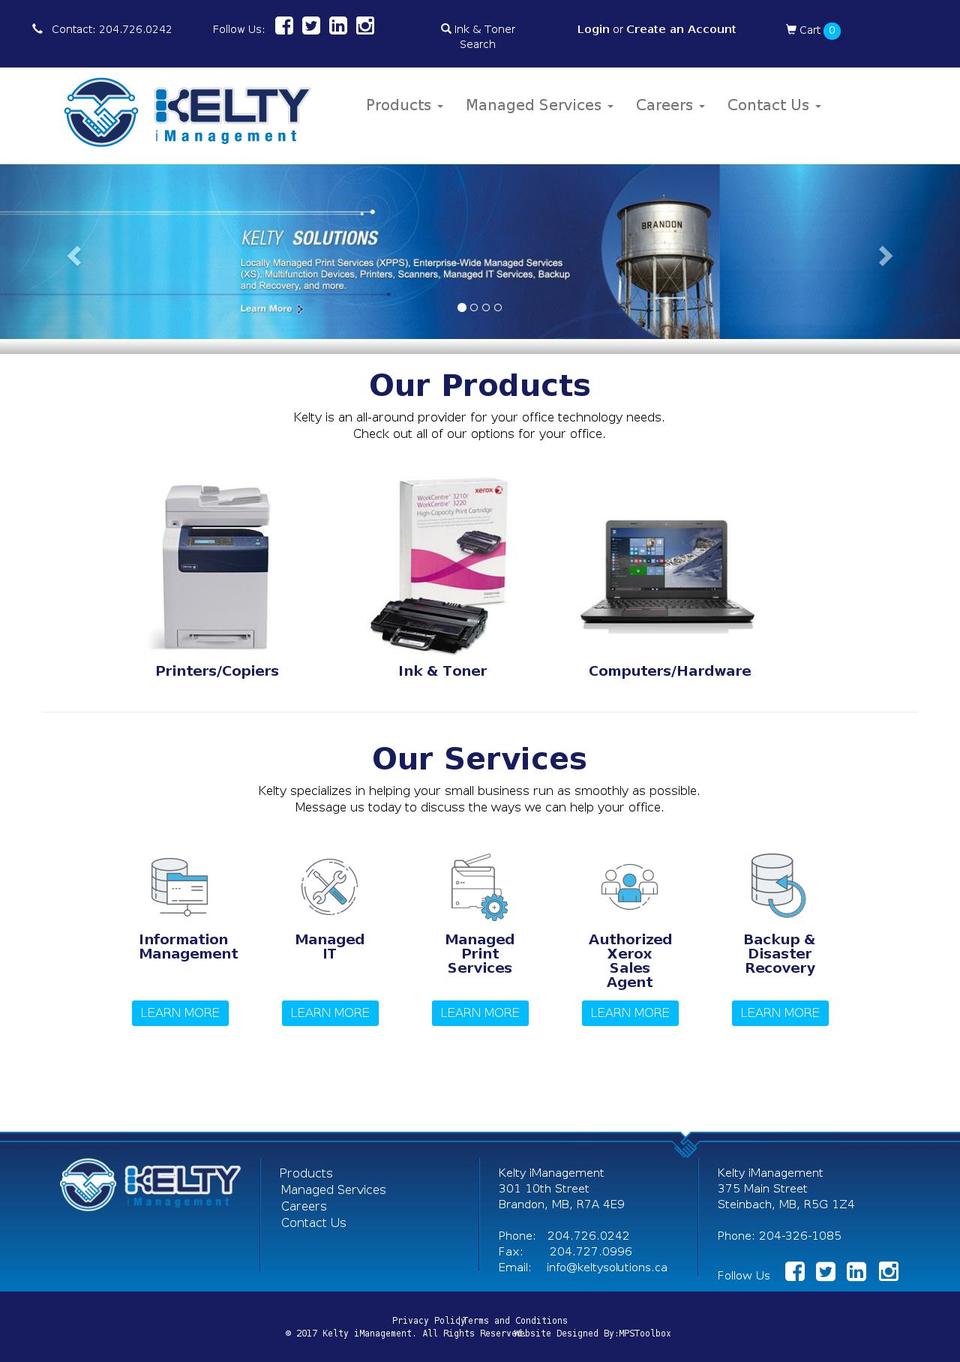 bootstrap-3 Shopify theme site example keltysolutions.ca